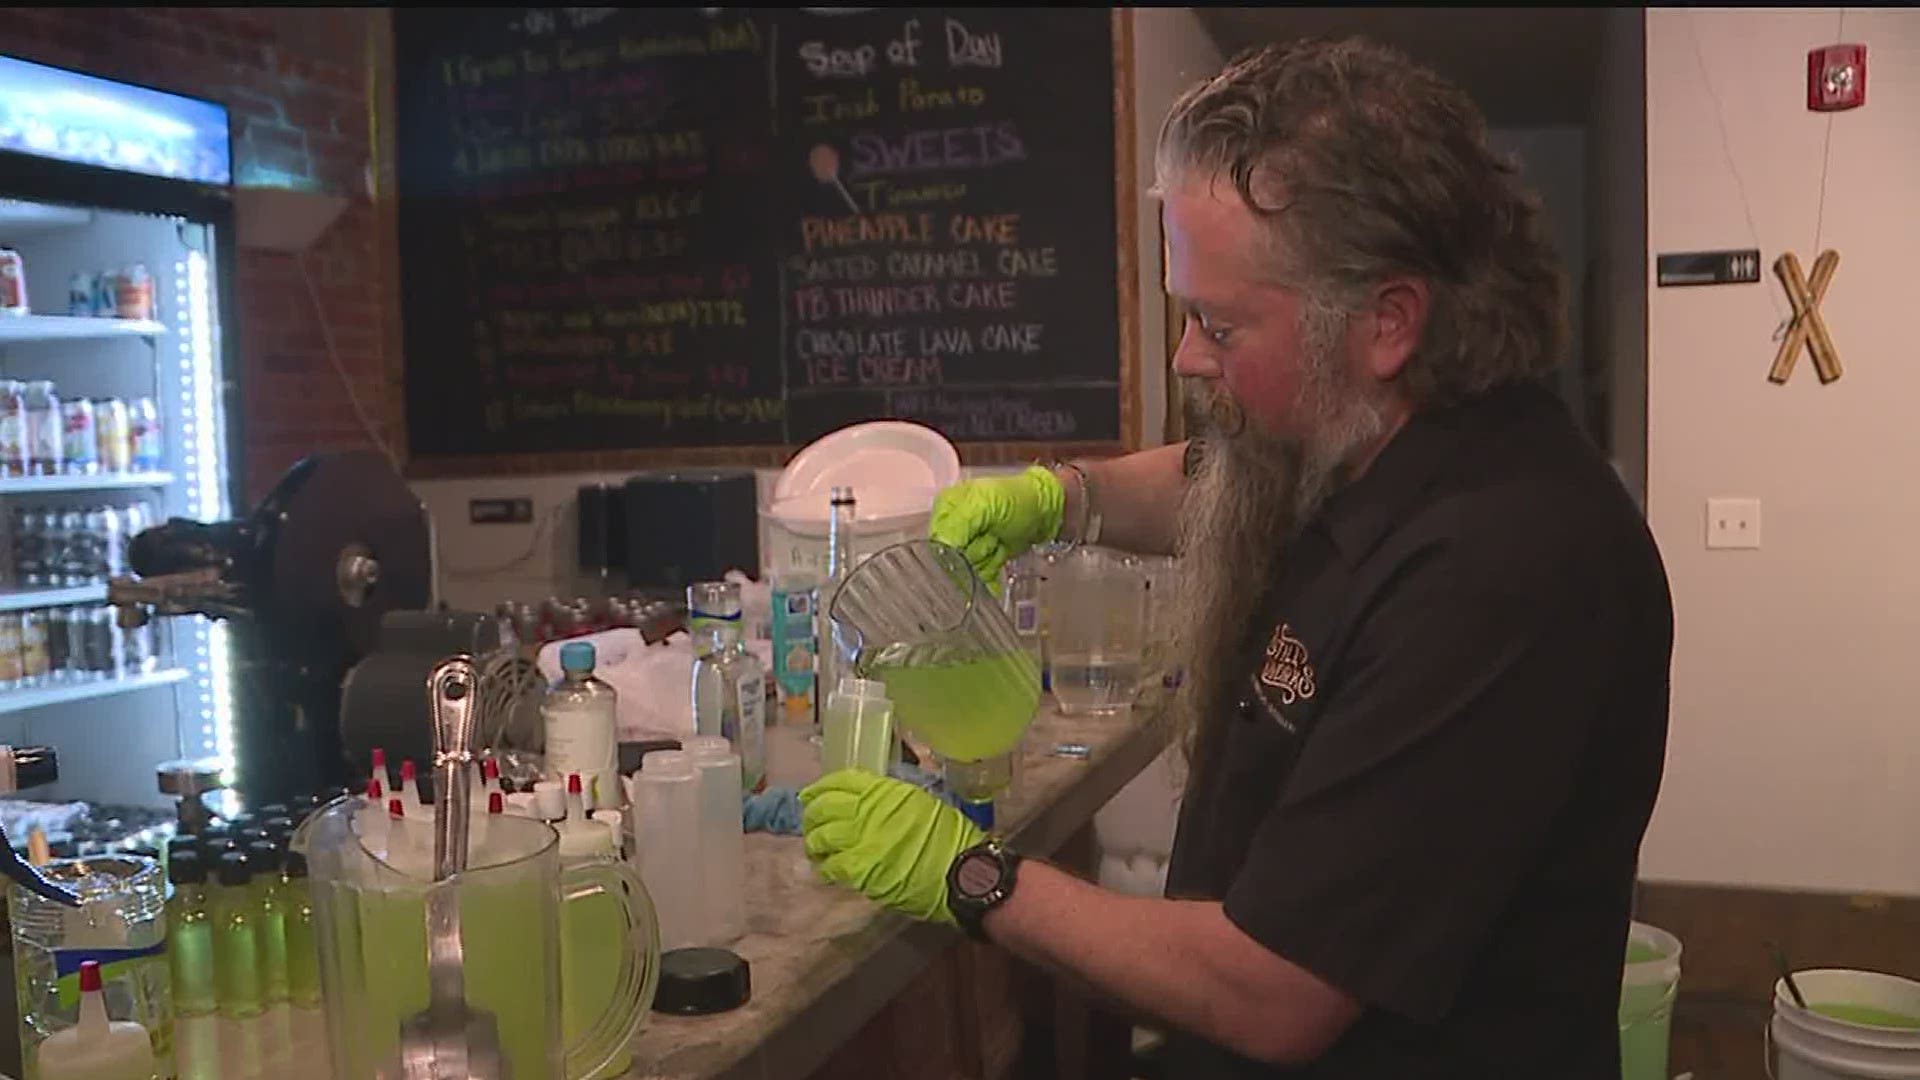 Tattered Flag Brewery and Still Works, a distillery in Dauphin County, is making free hand sanitizer for the public to help fight COVID-19